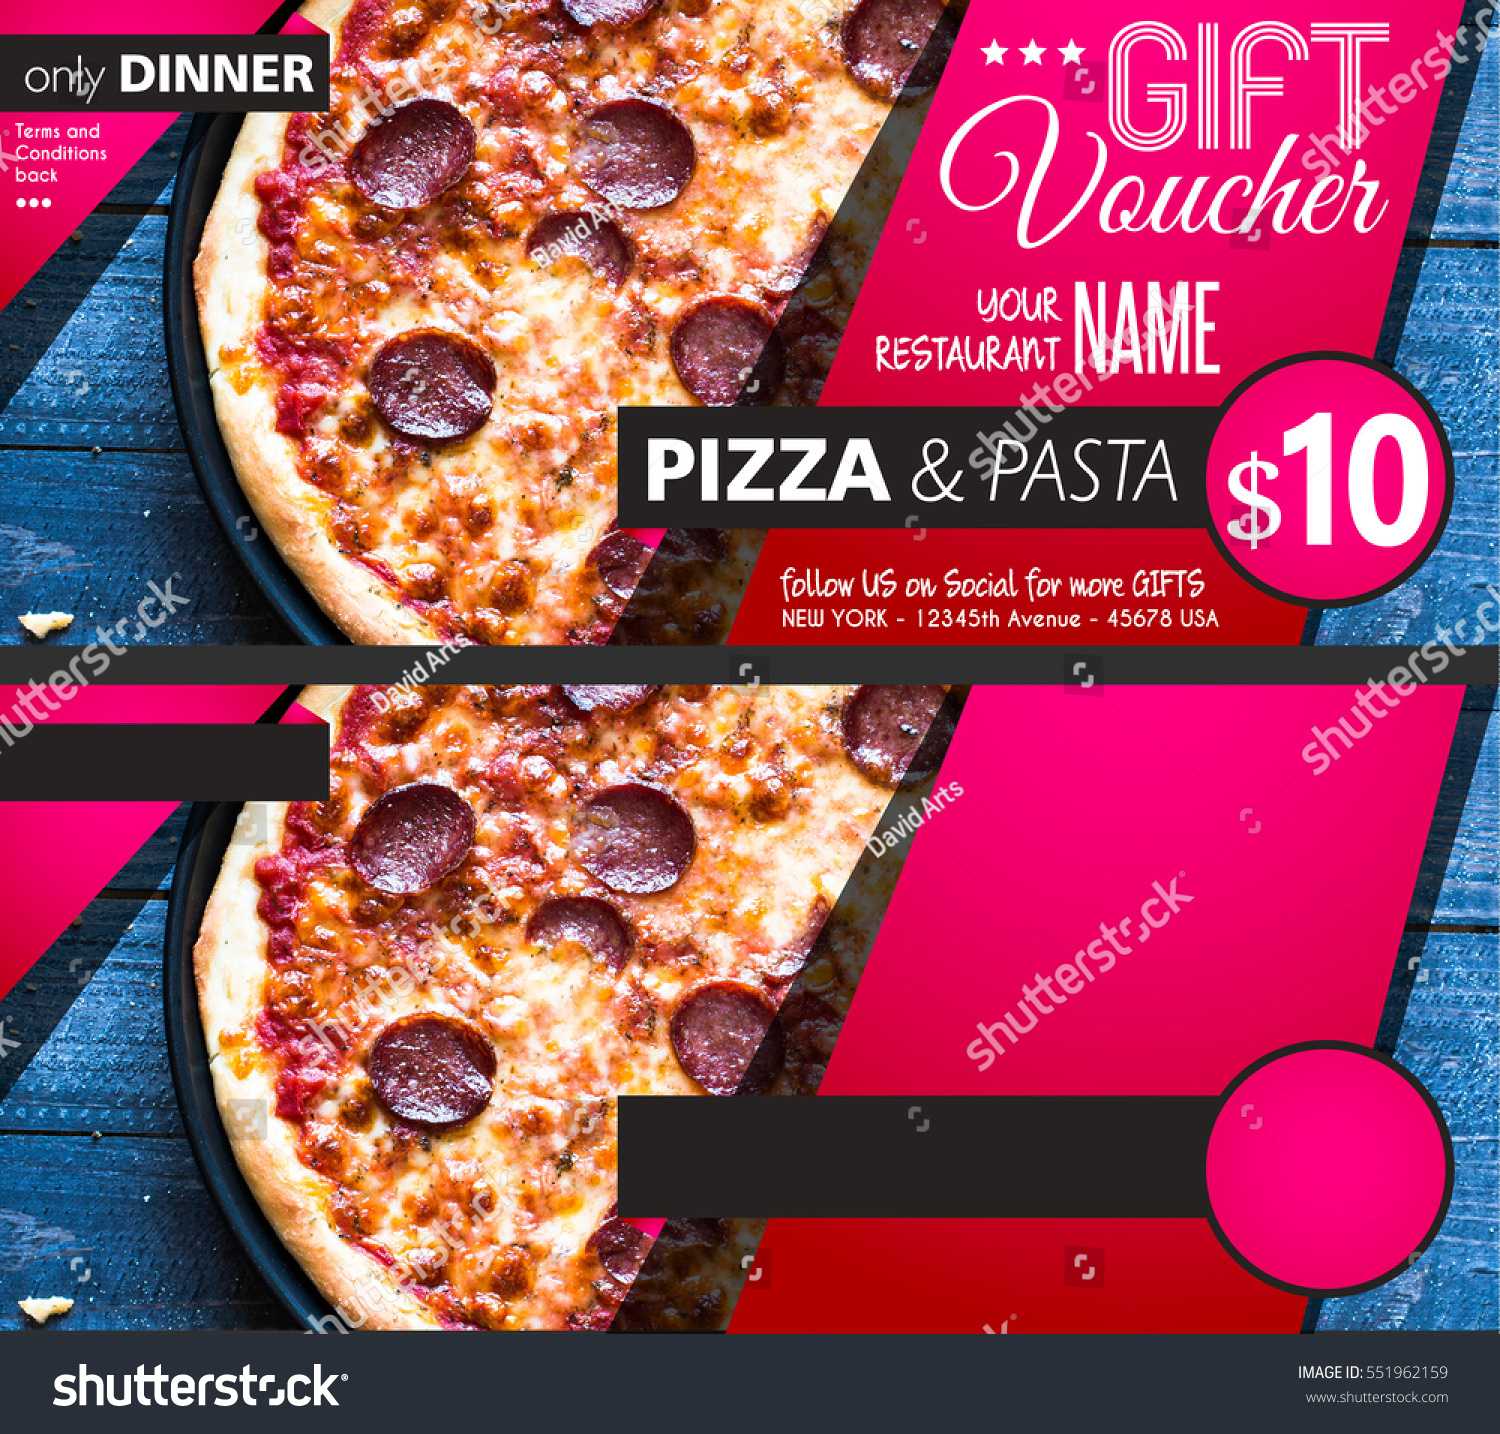 Restaurant Gift Voucher Flyer Template Delicious Stock Photo For Pizza Gift Certificate Template